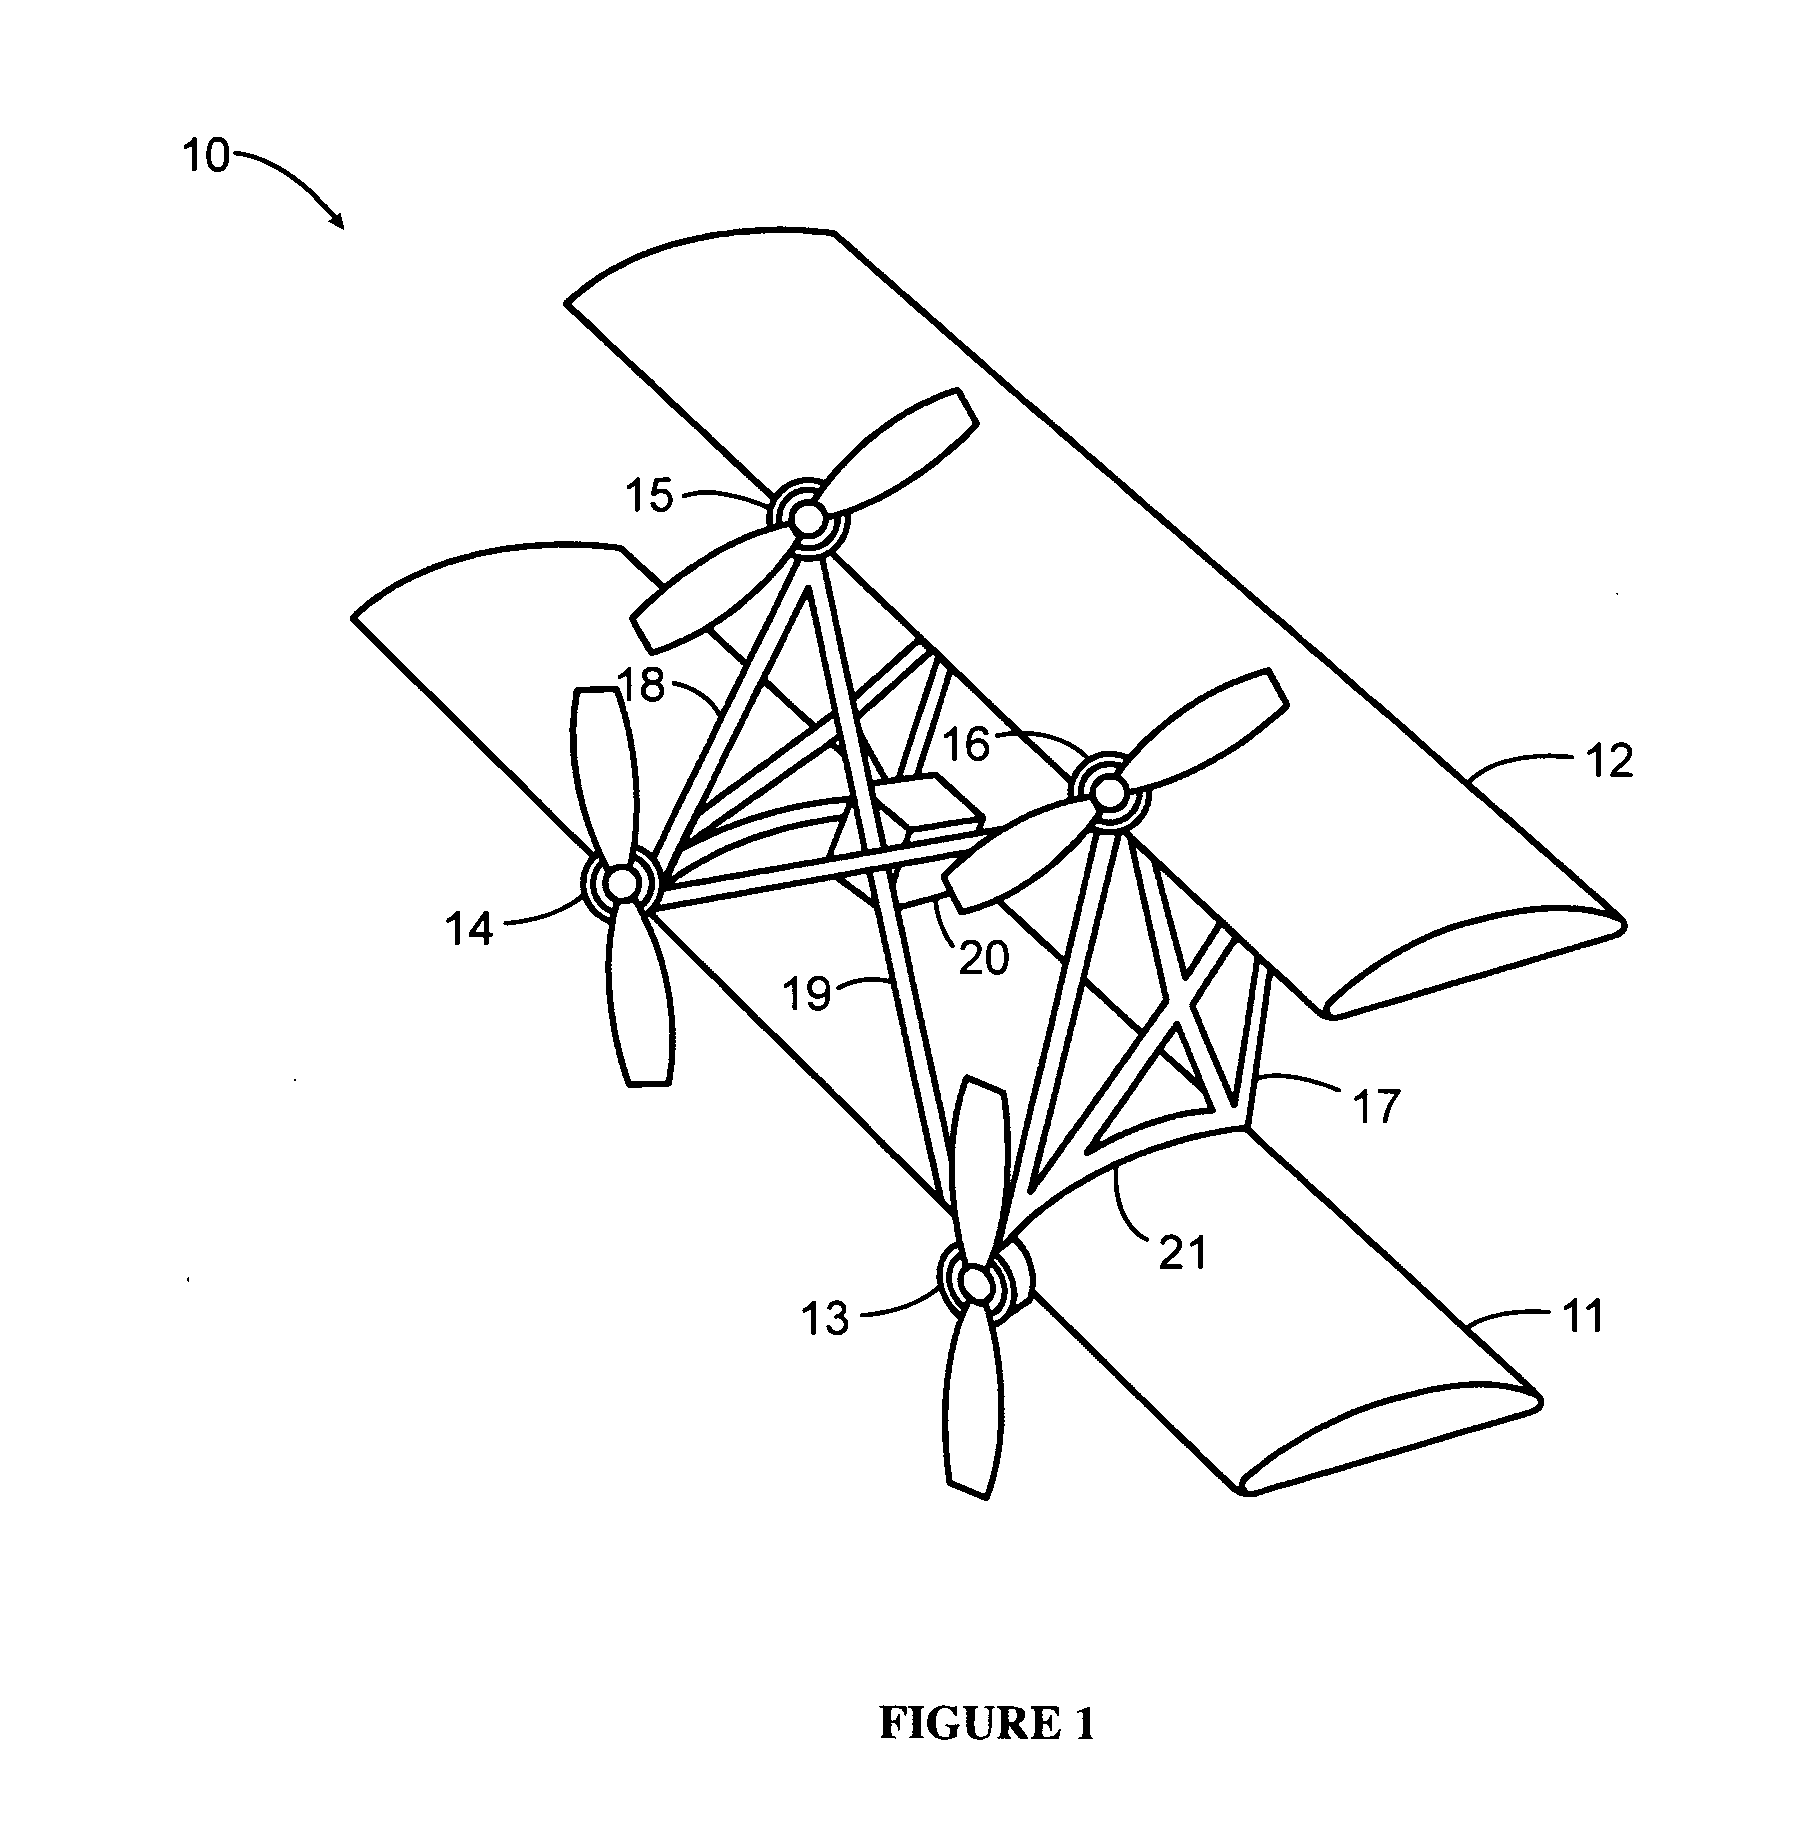 Controlled take-off and flight system using thrust differentials